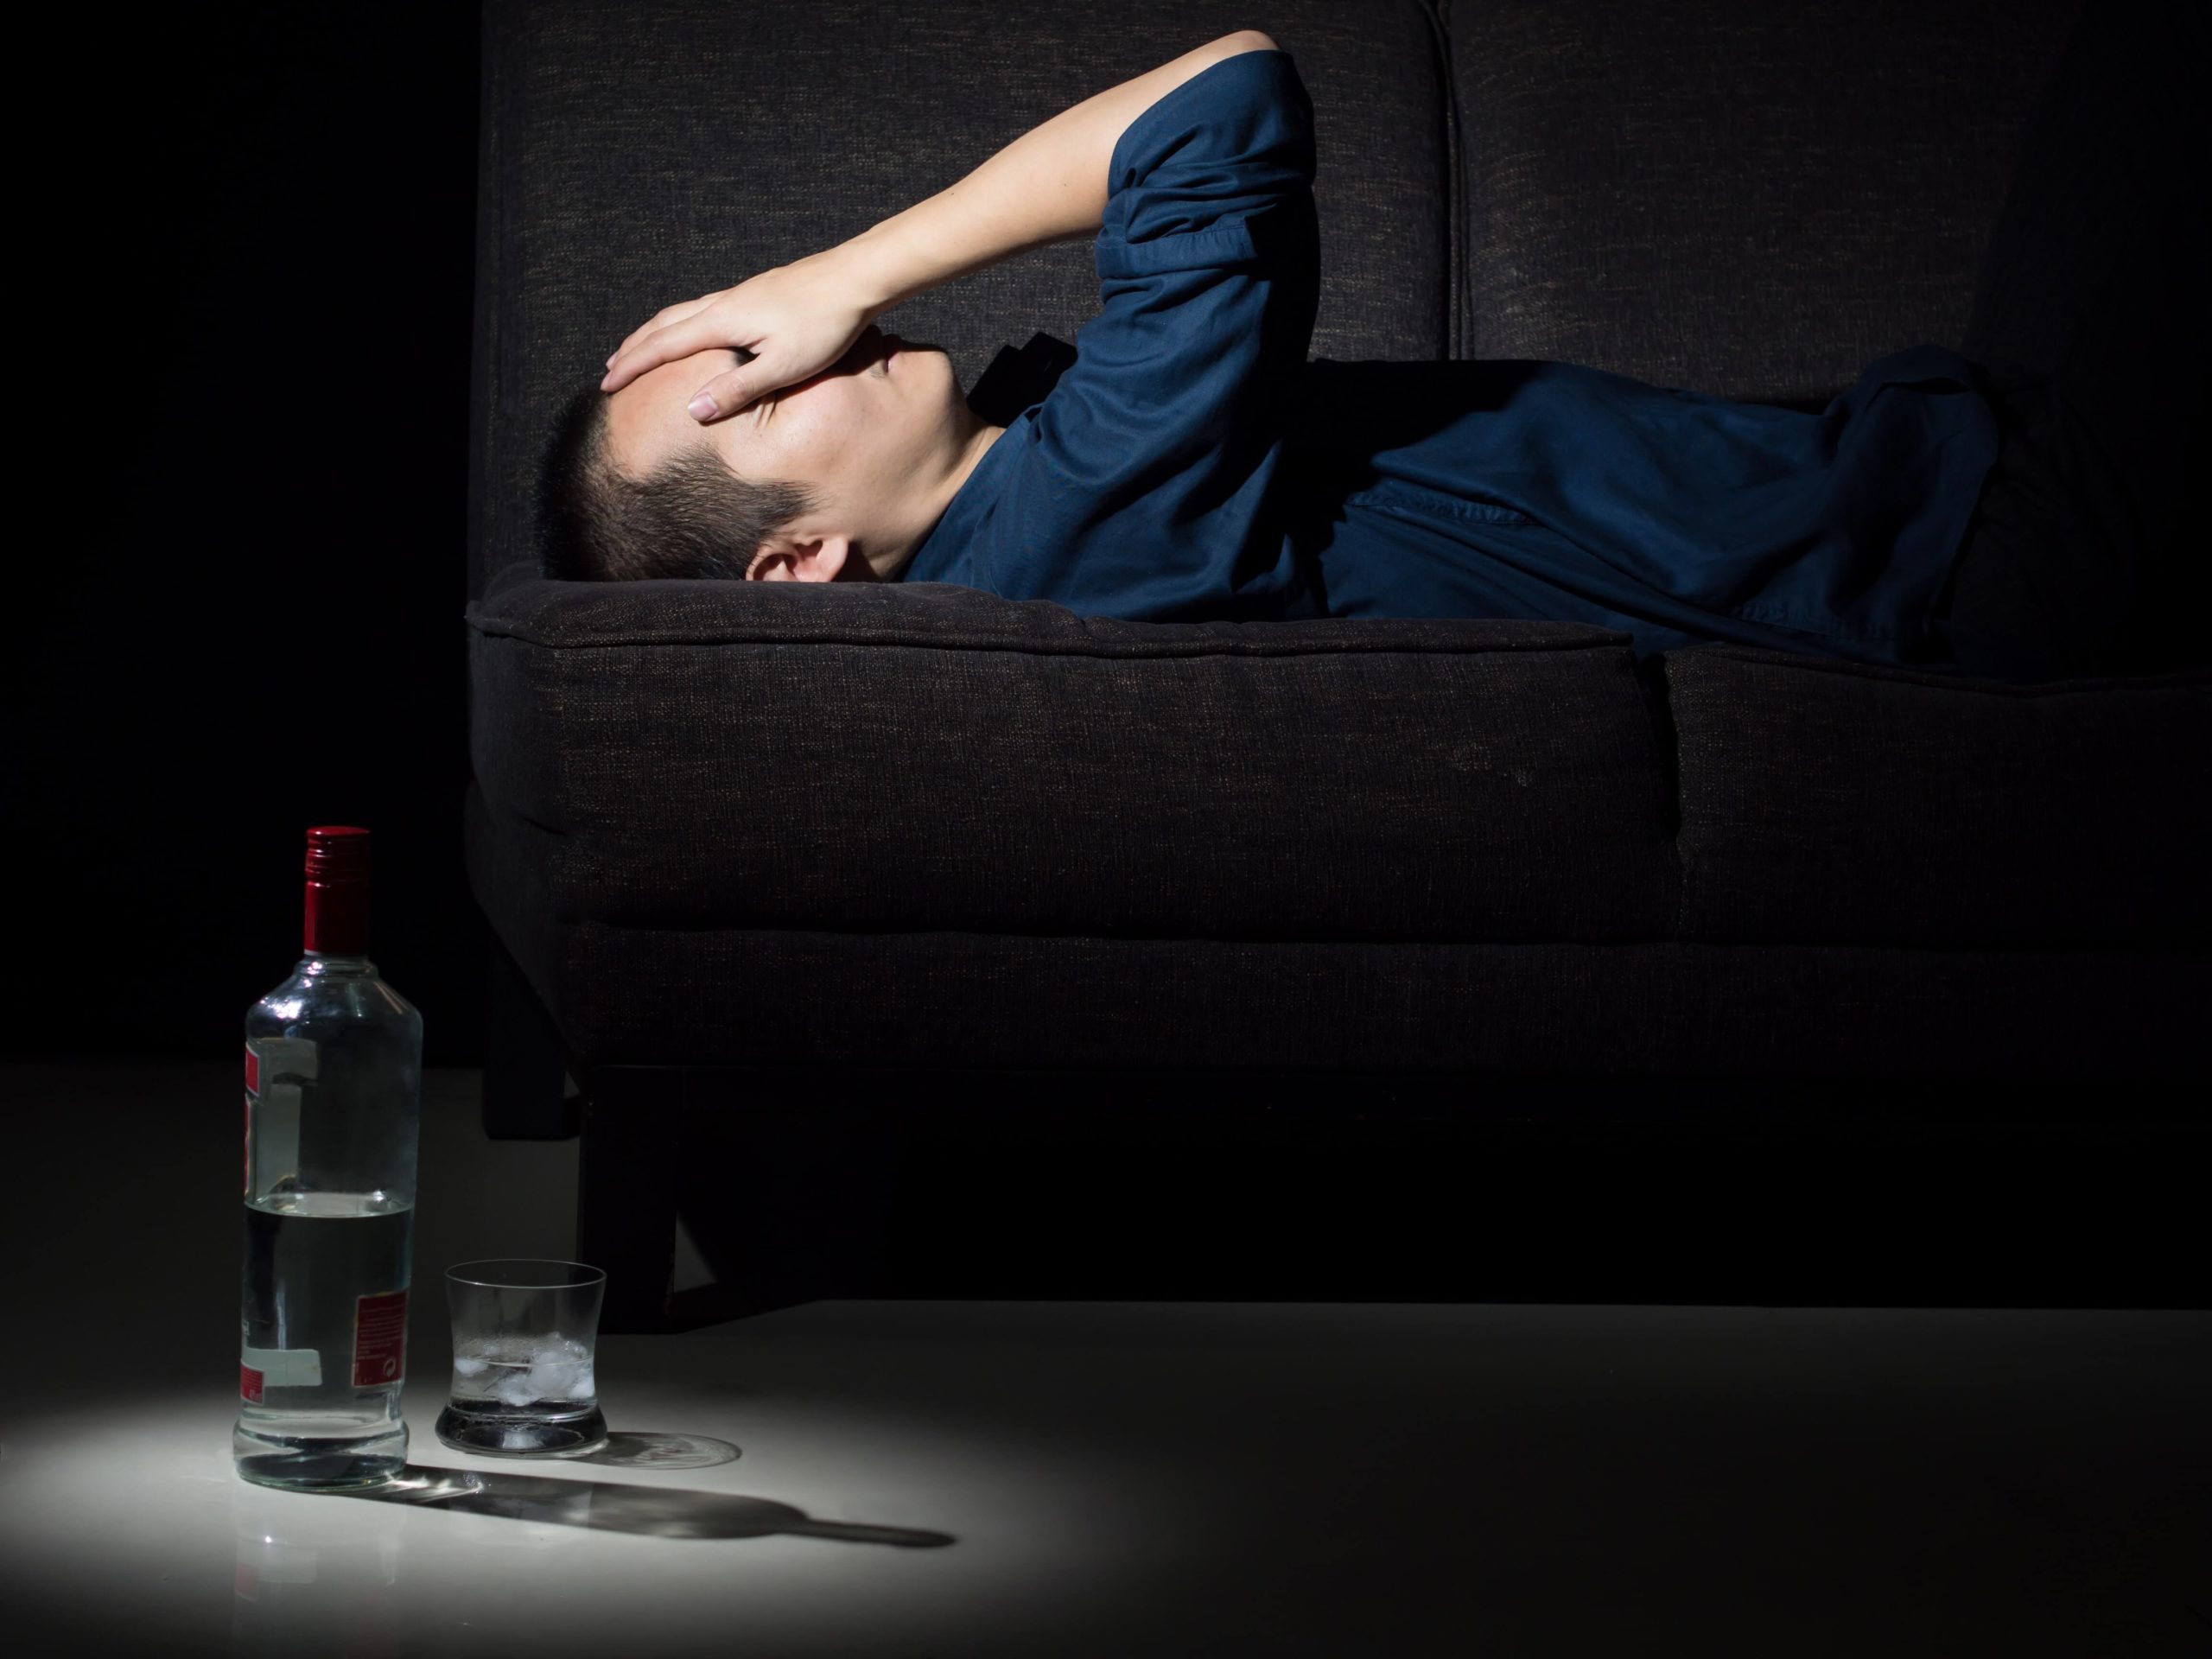 man struggling with the physical effects of alcohol abuse